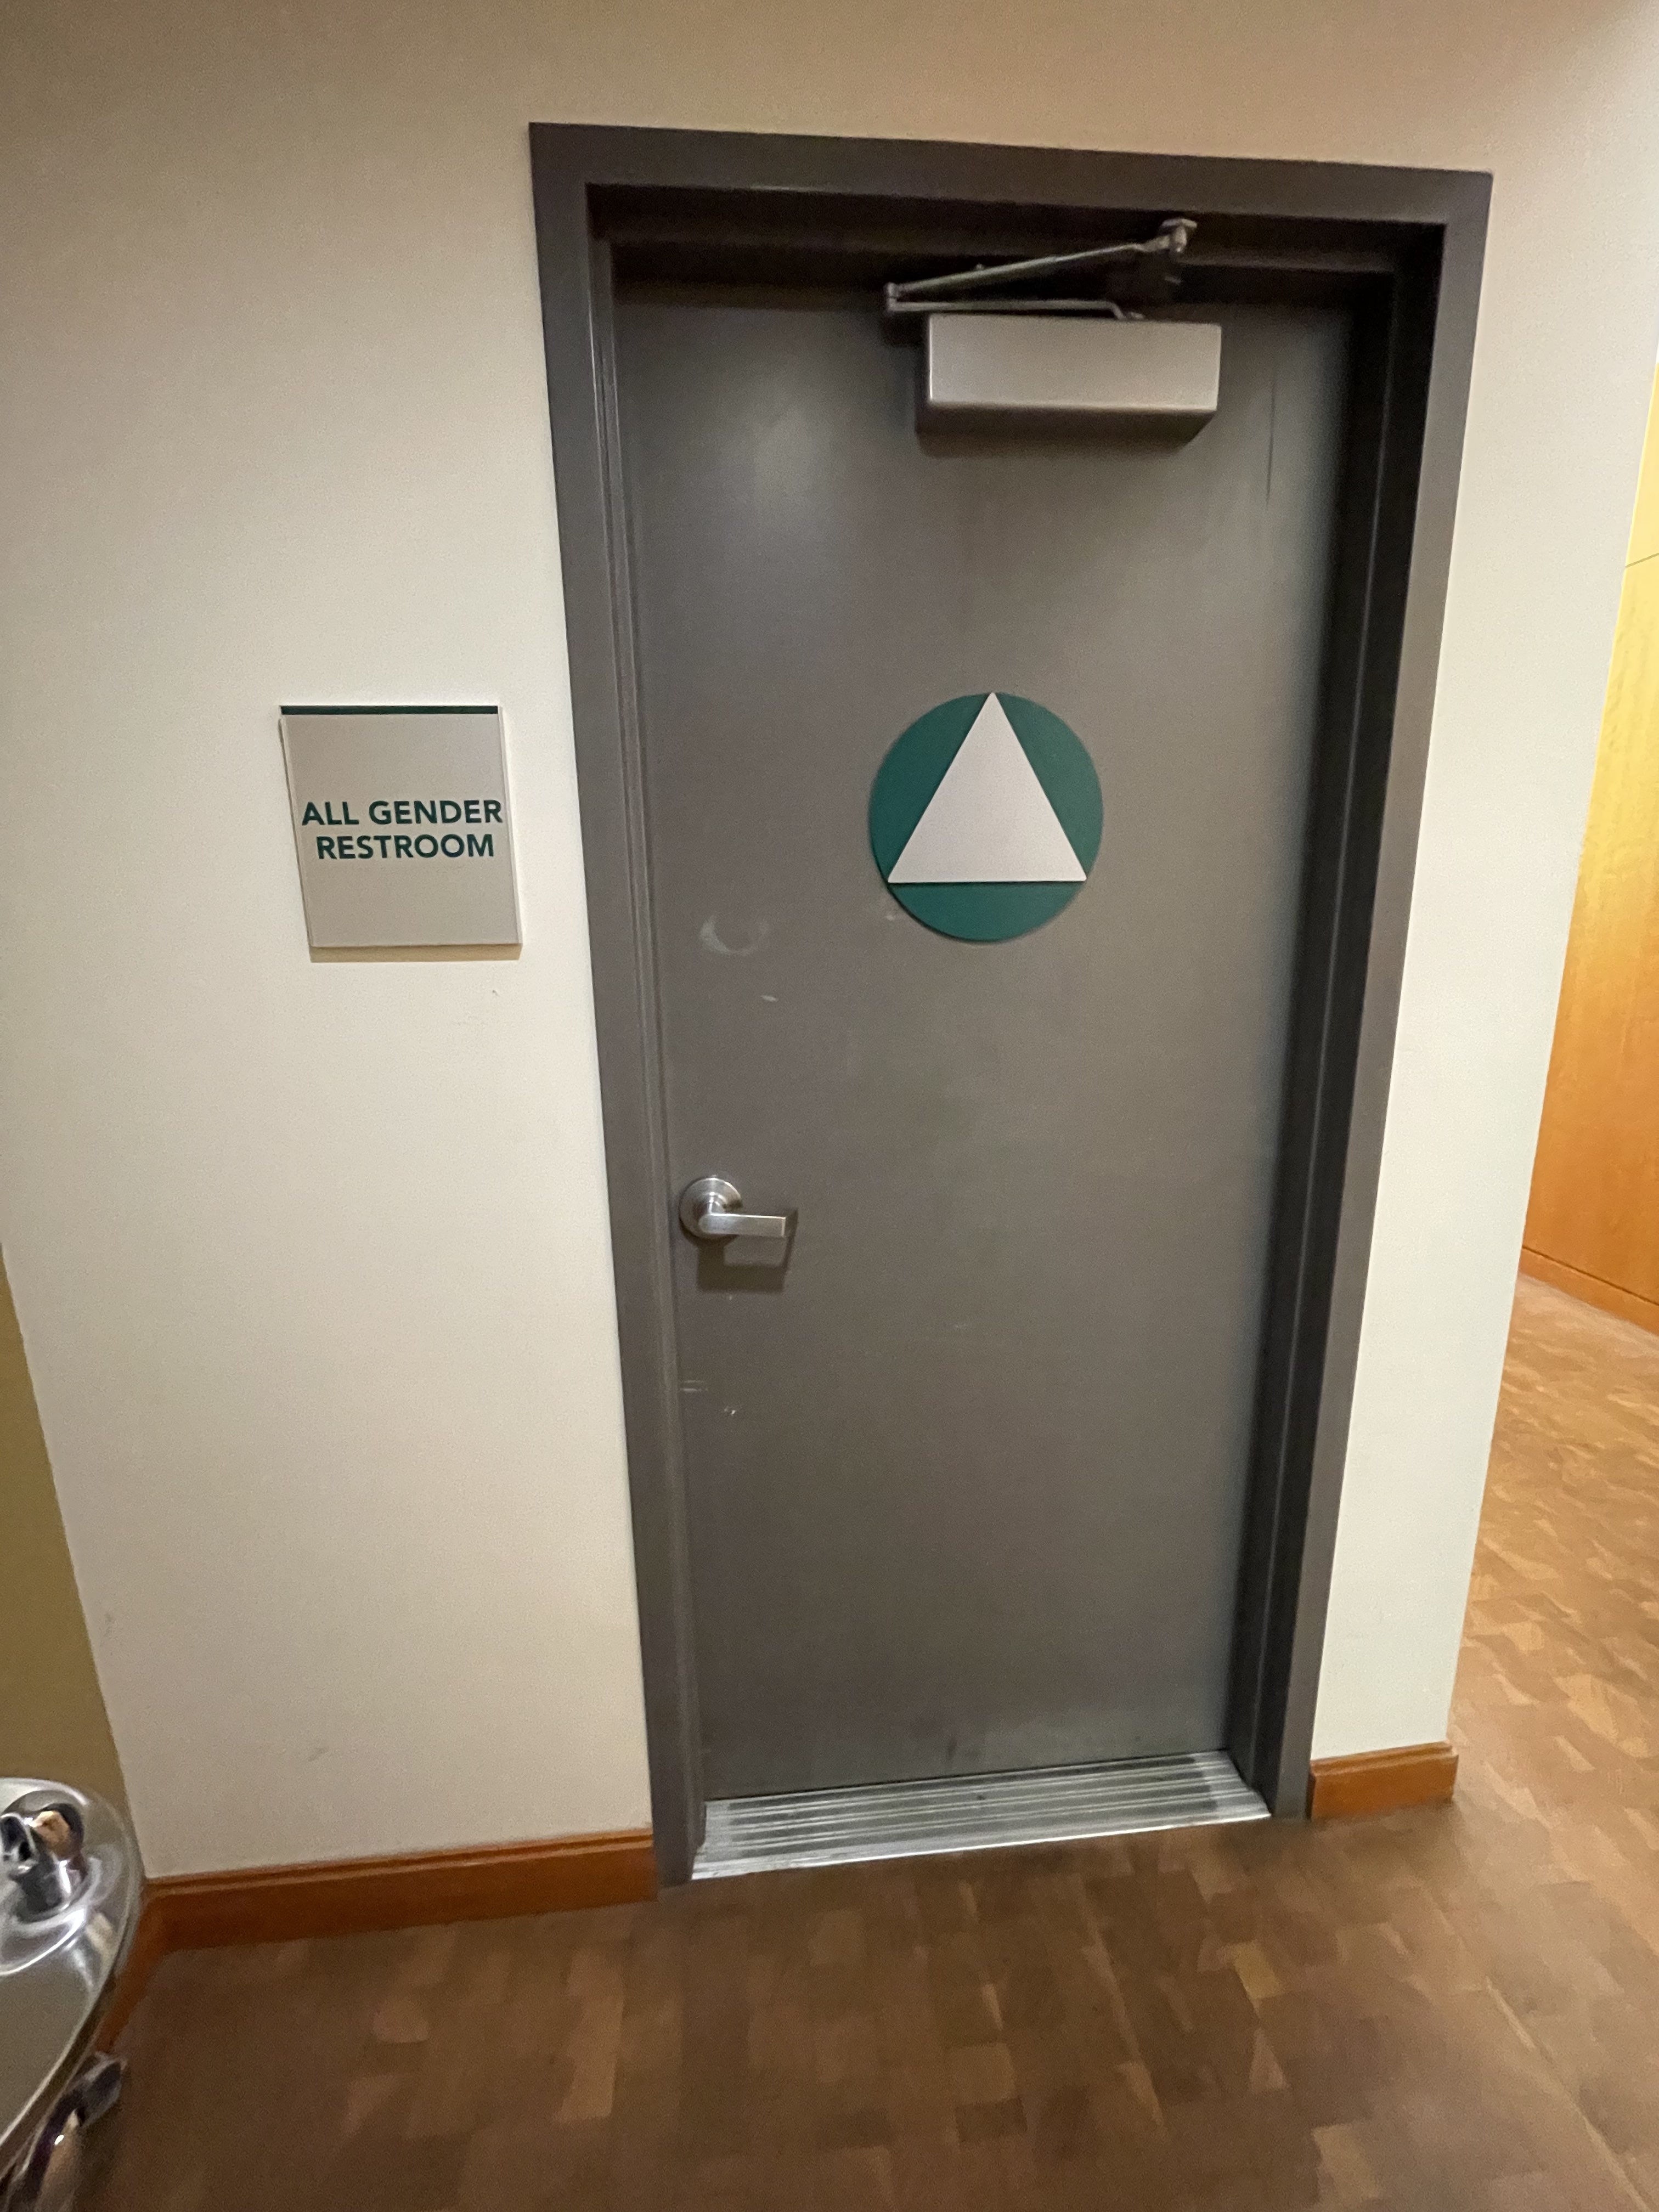 All gender bathroom on the first floor of the Behavioral and Social Studies building.